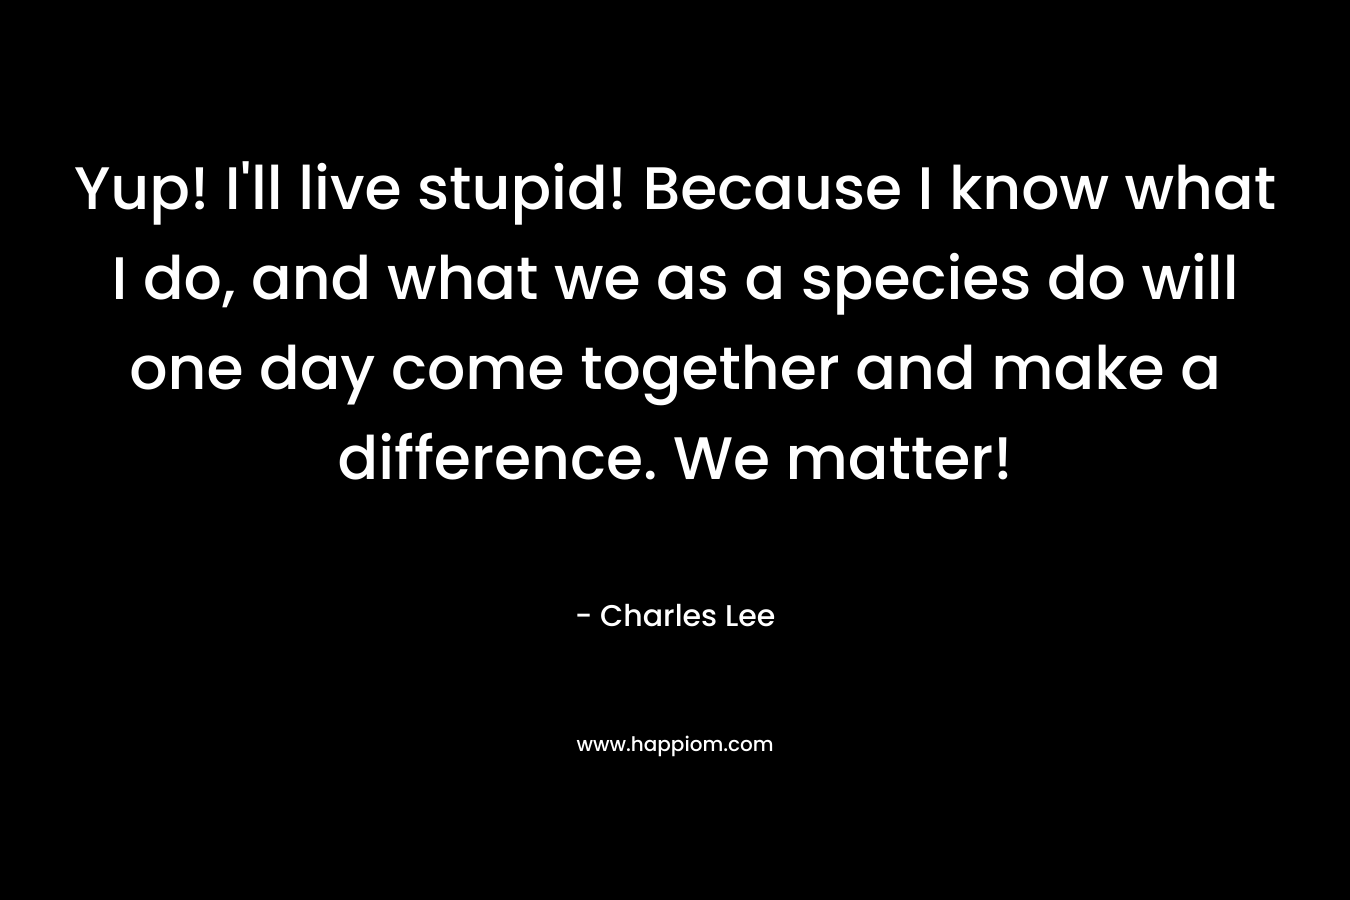 Yup! I’ll live stupid! Because I know what I do, and what we as a species do will one day come together and make a difference. We matter! – Charles   Lee